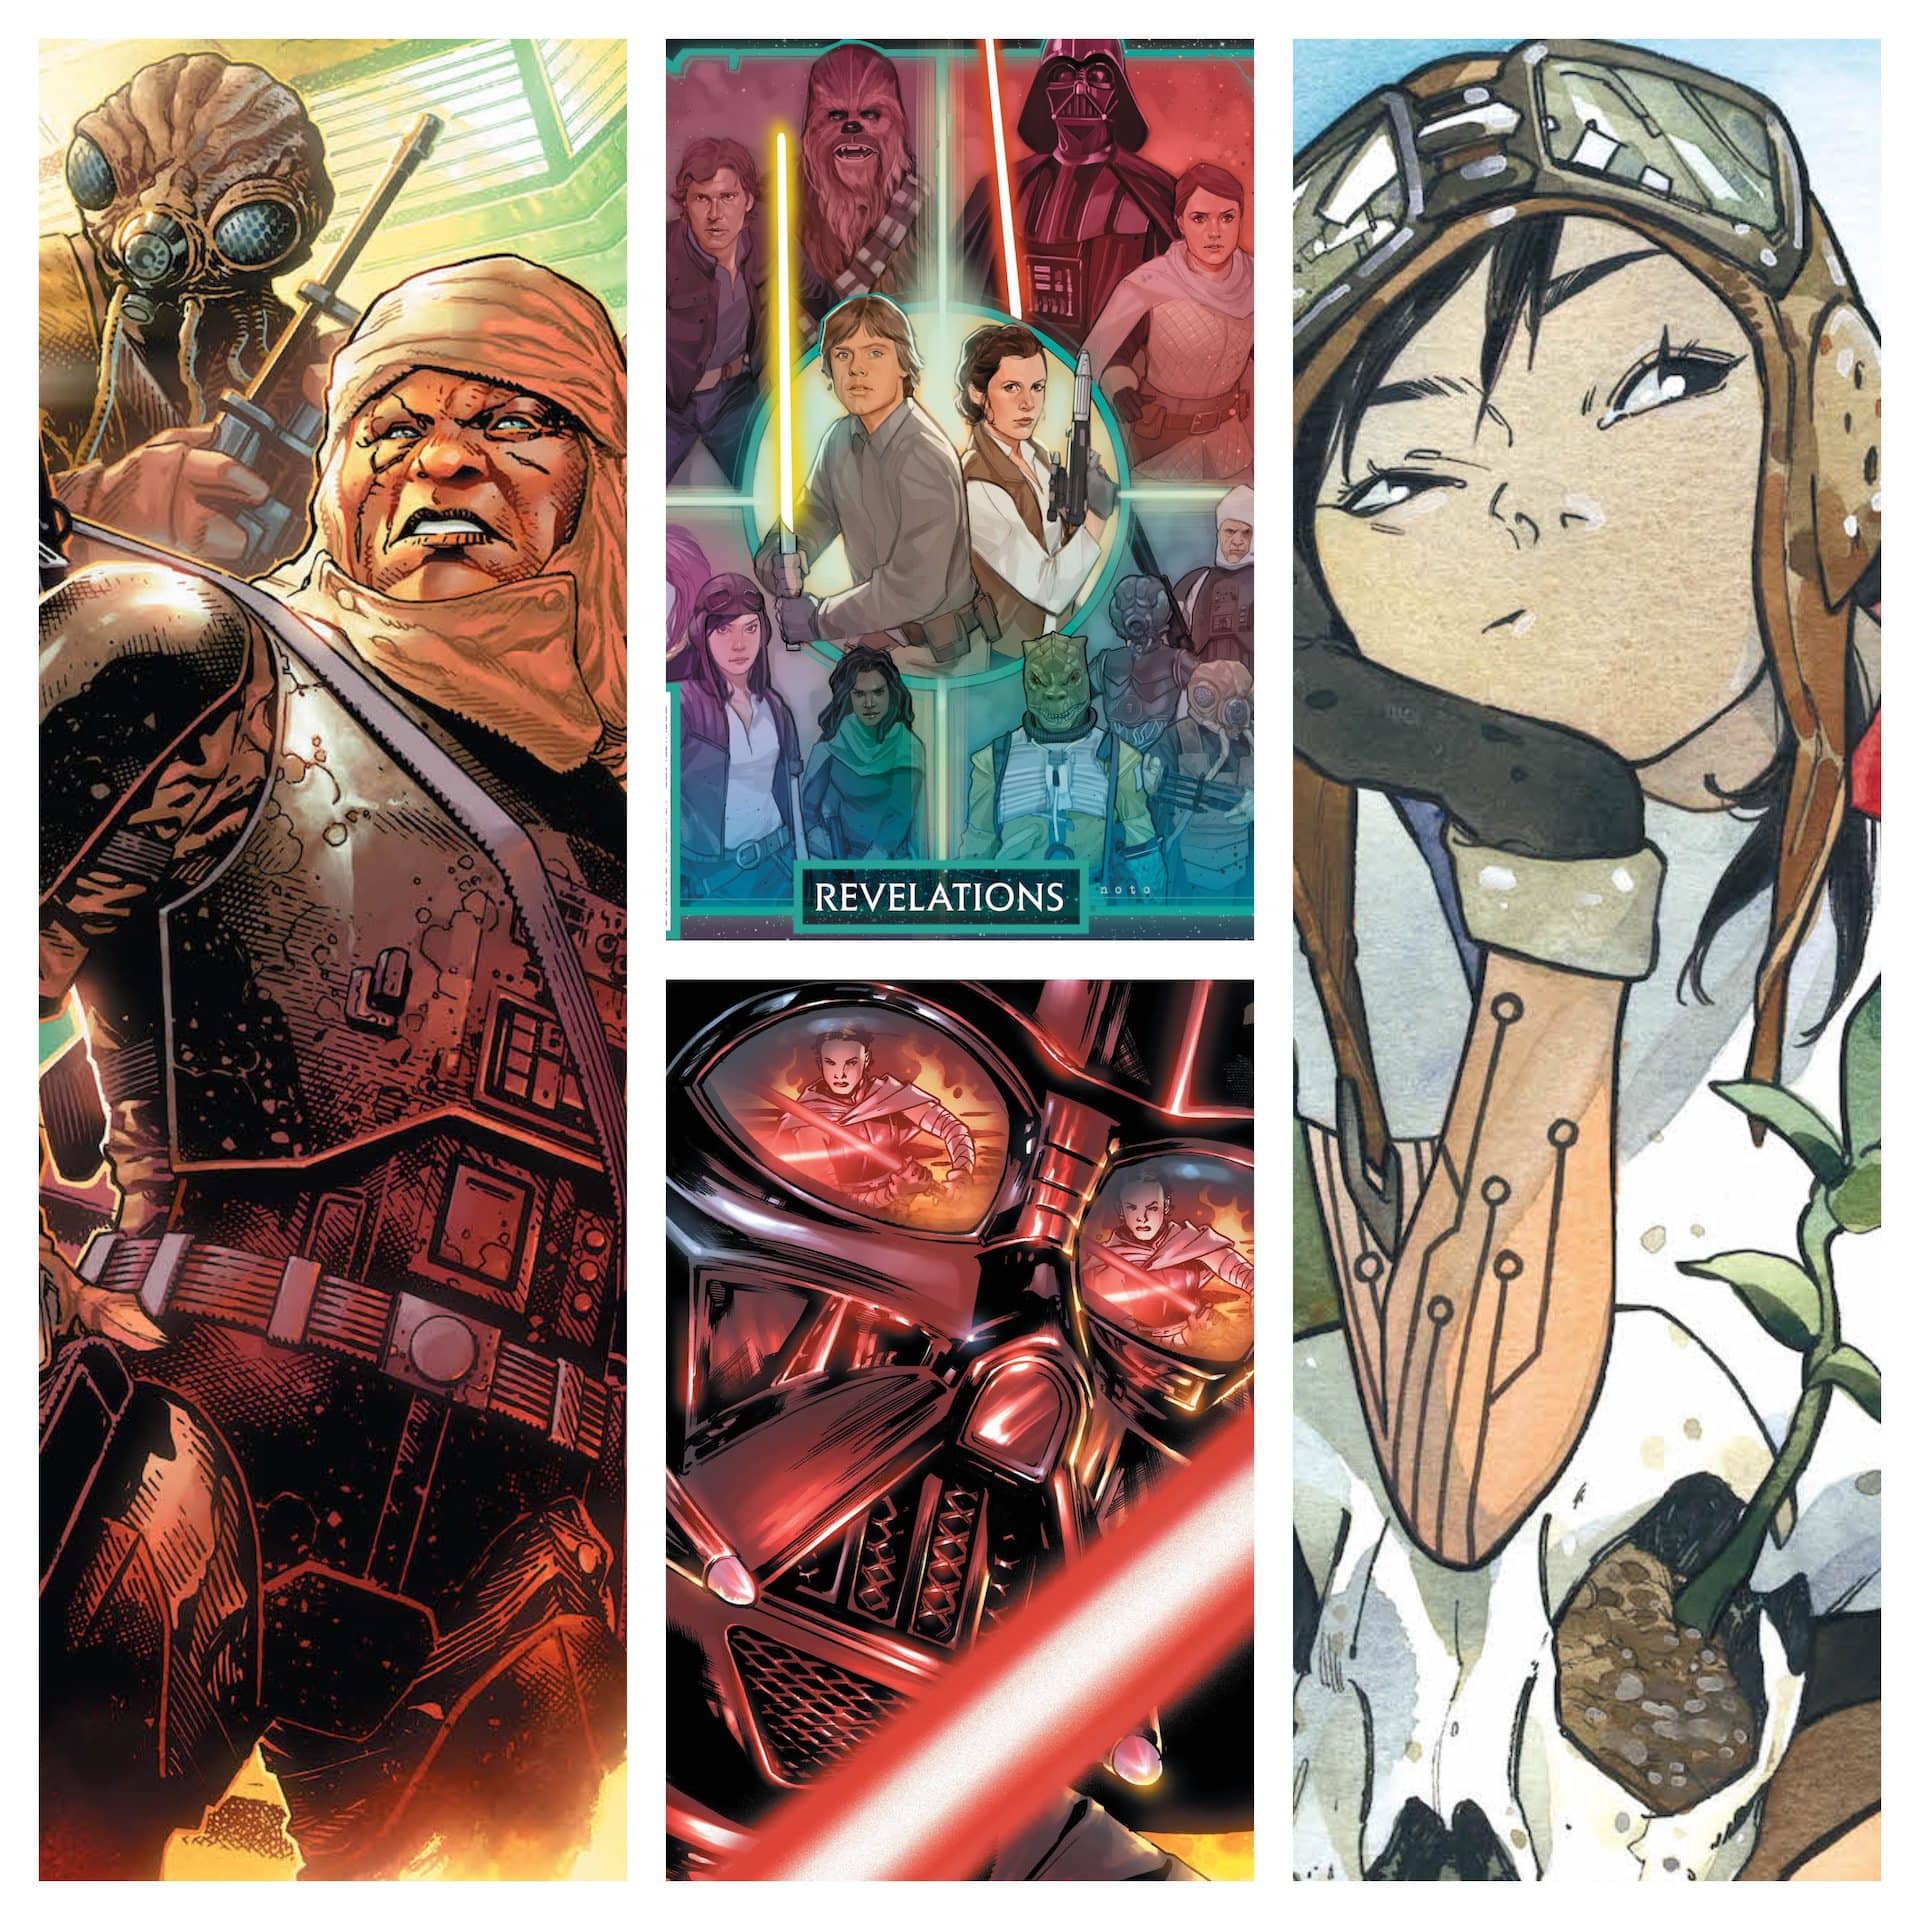 'Star Wars: Revelations' #1 gives readers a glimpse at the fates of the galaxy